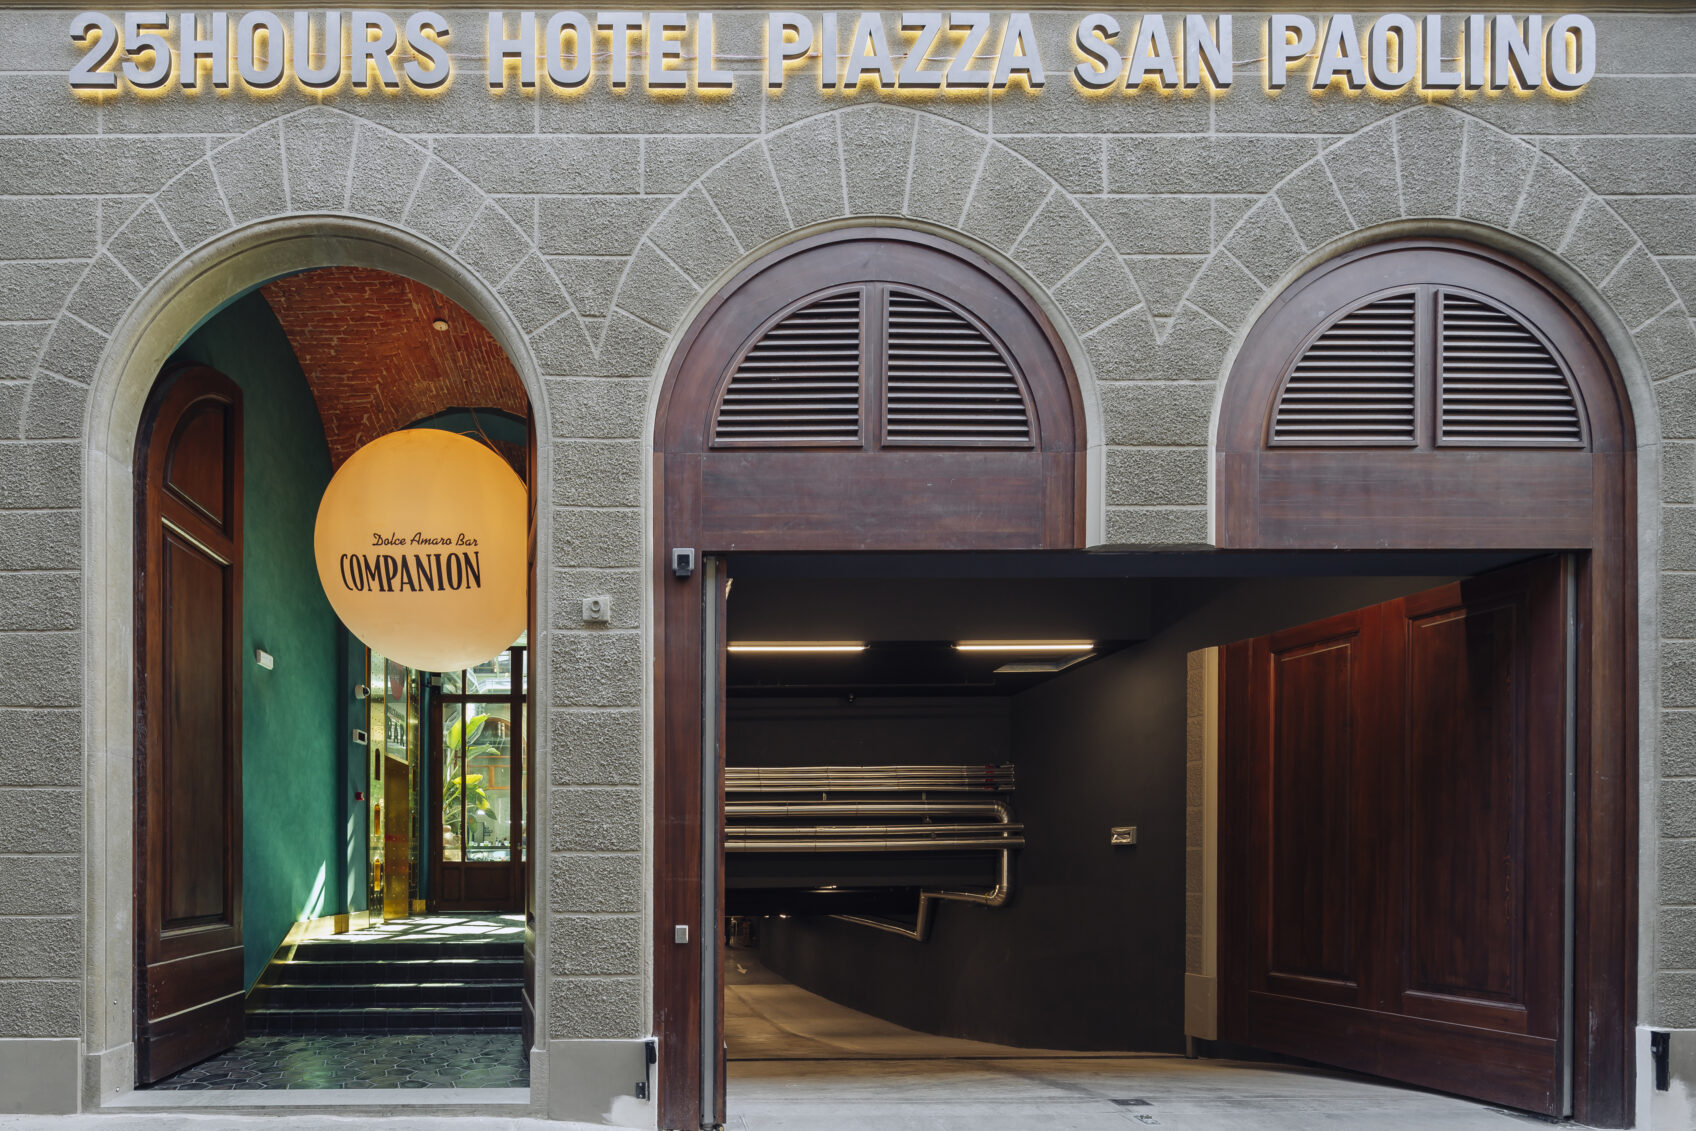 Entrance 25Hours Hotel Convento San Paolino Florence